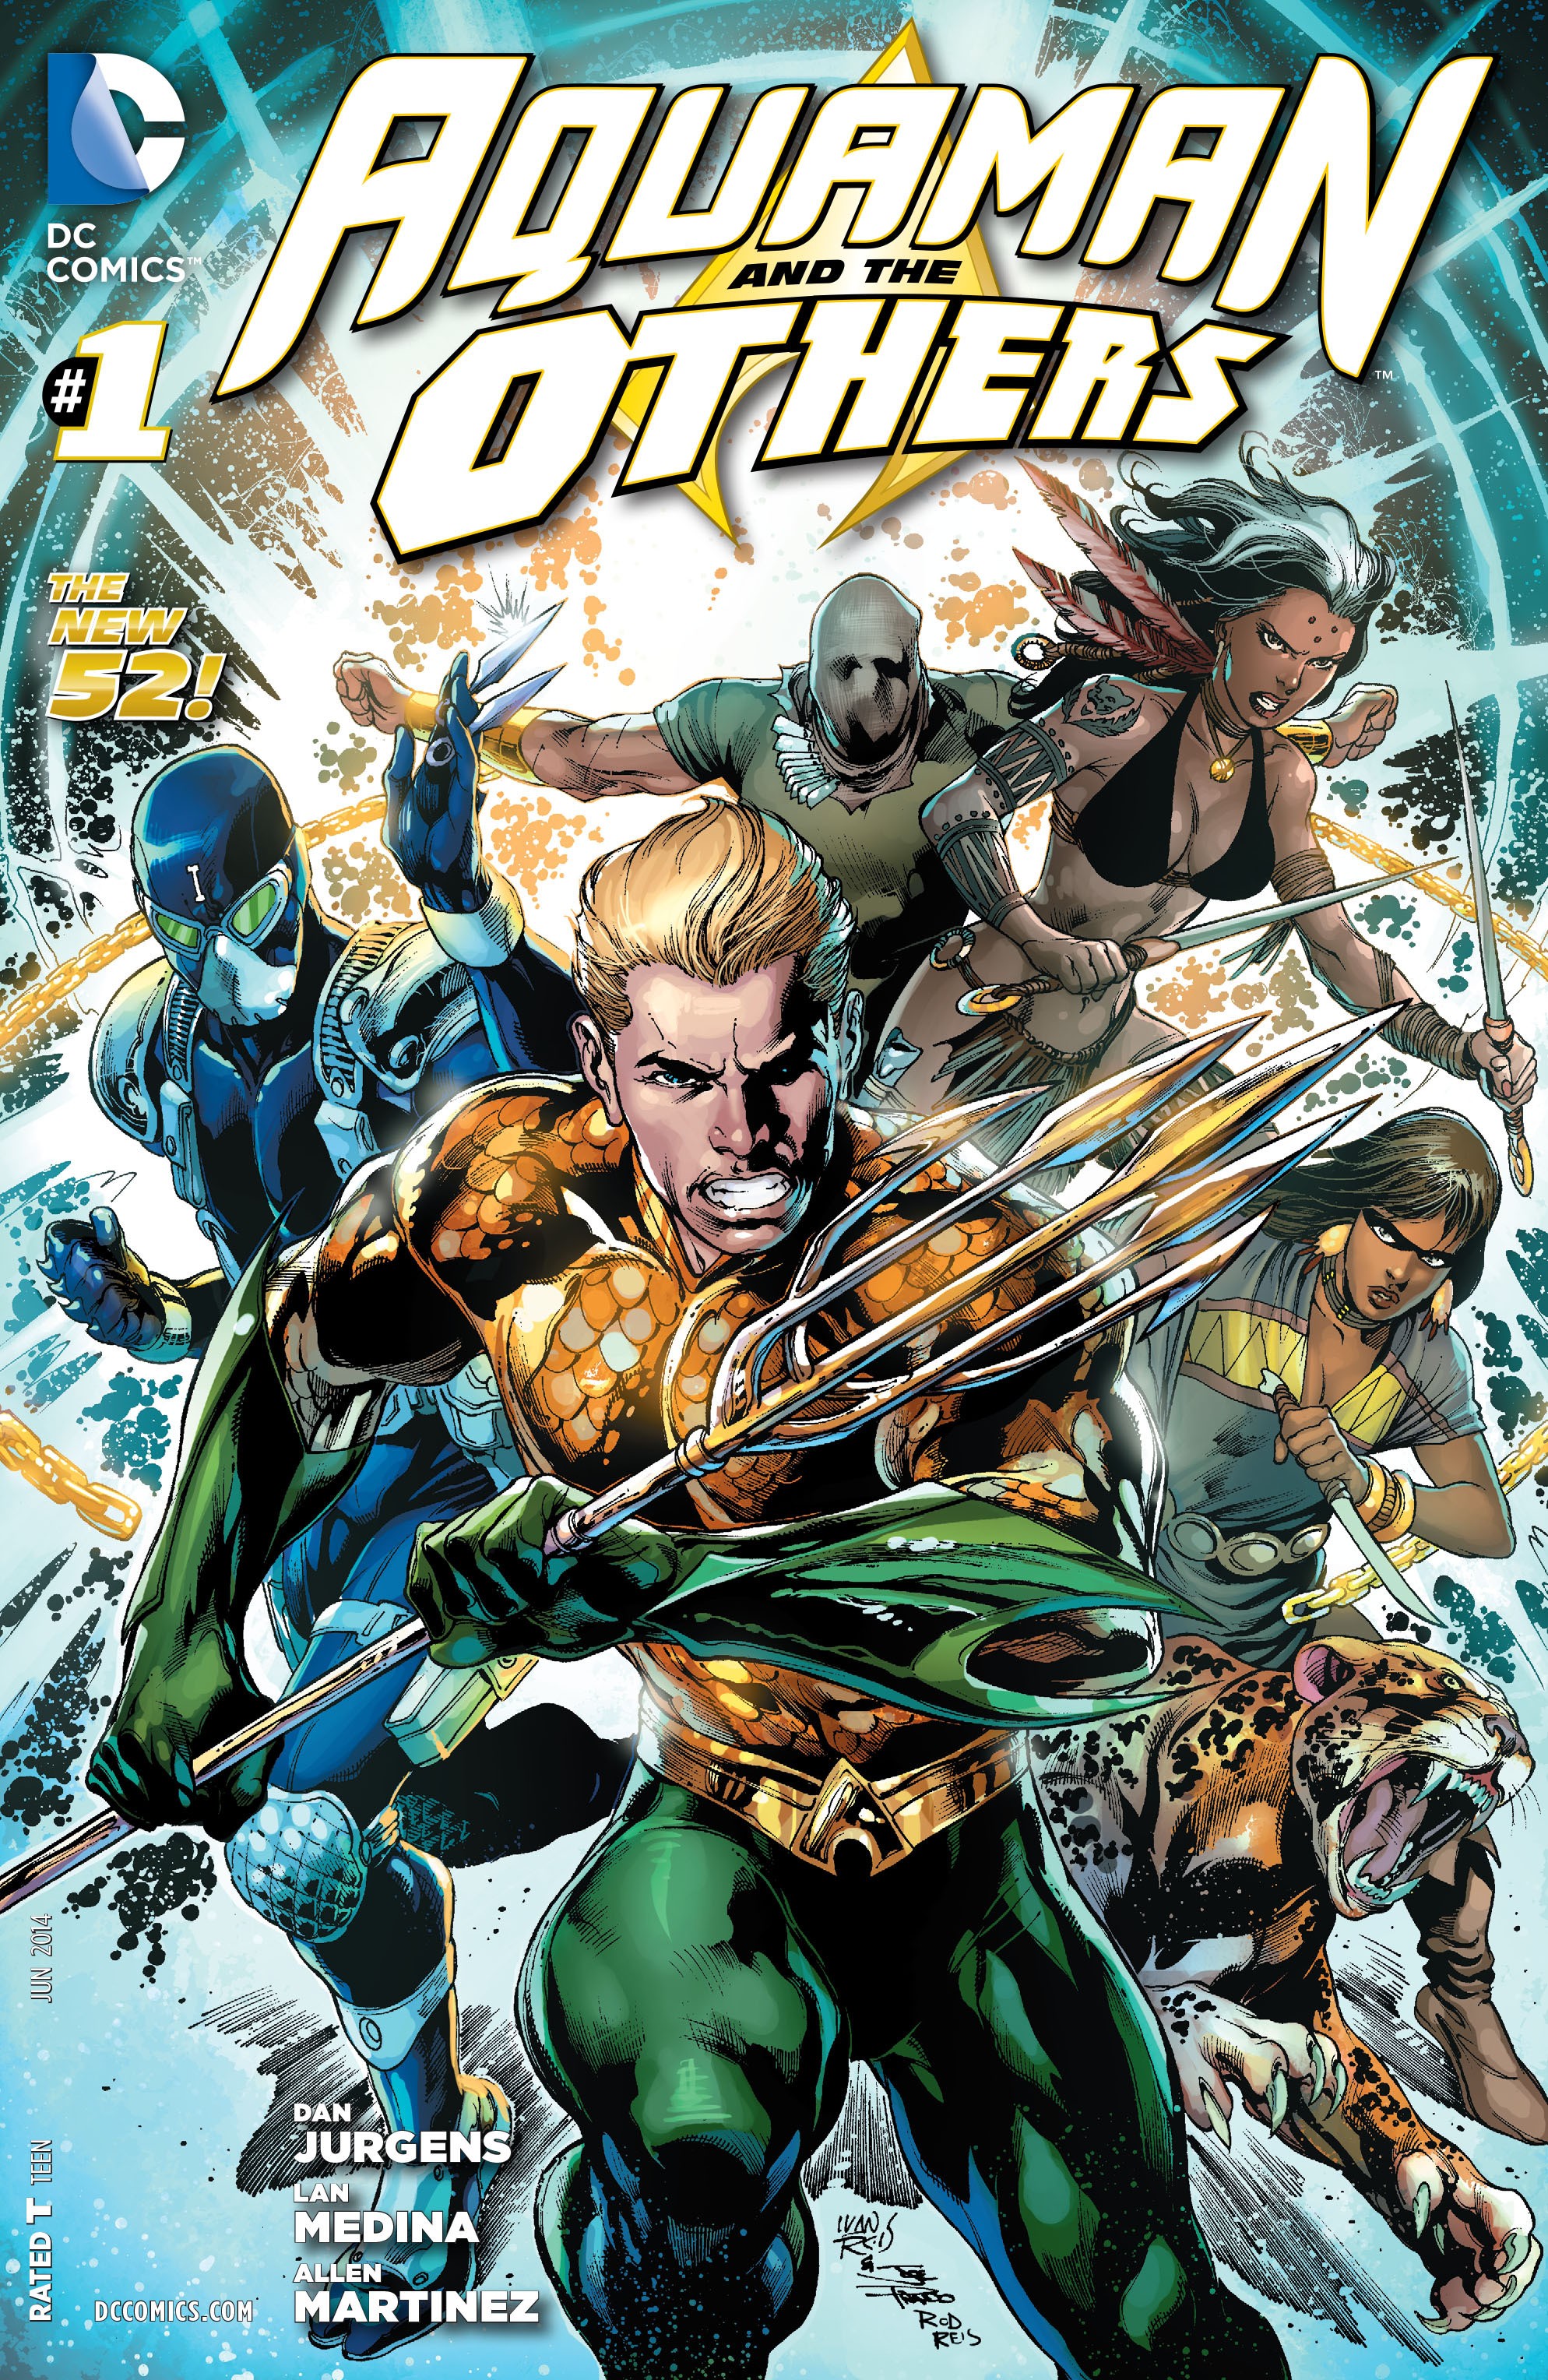 Aquaman and the Others Vol. 1 #1